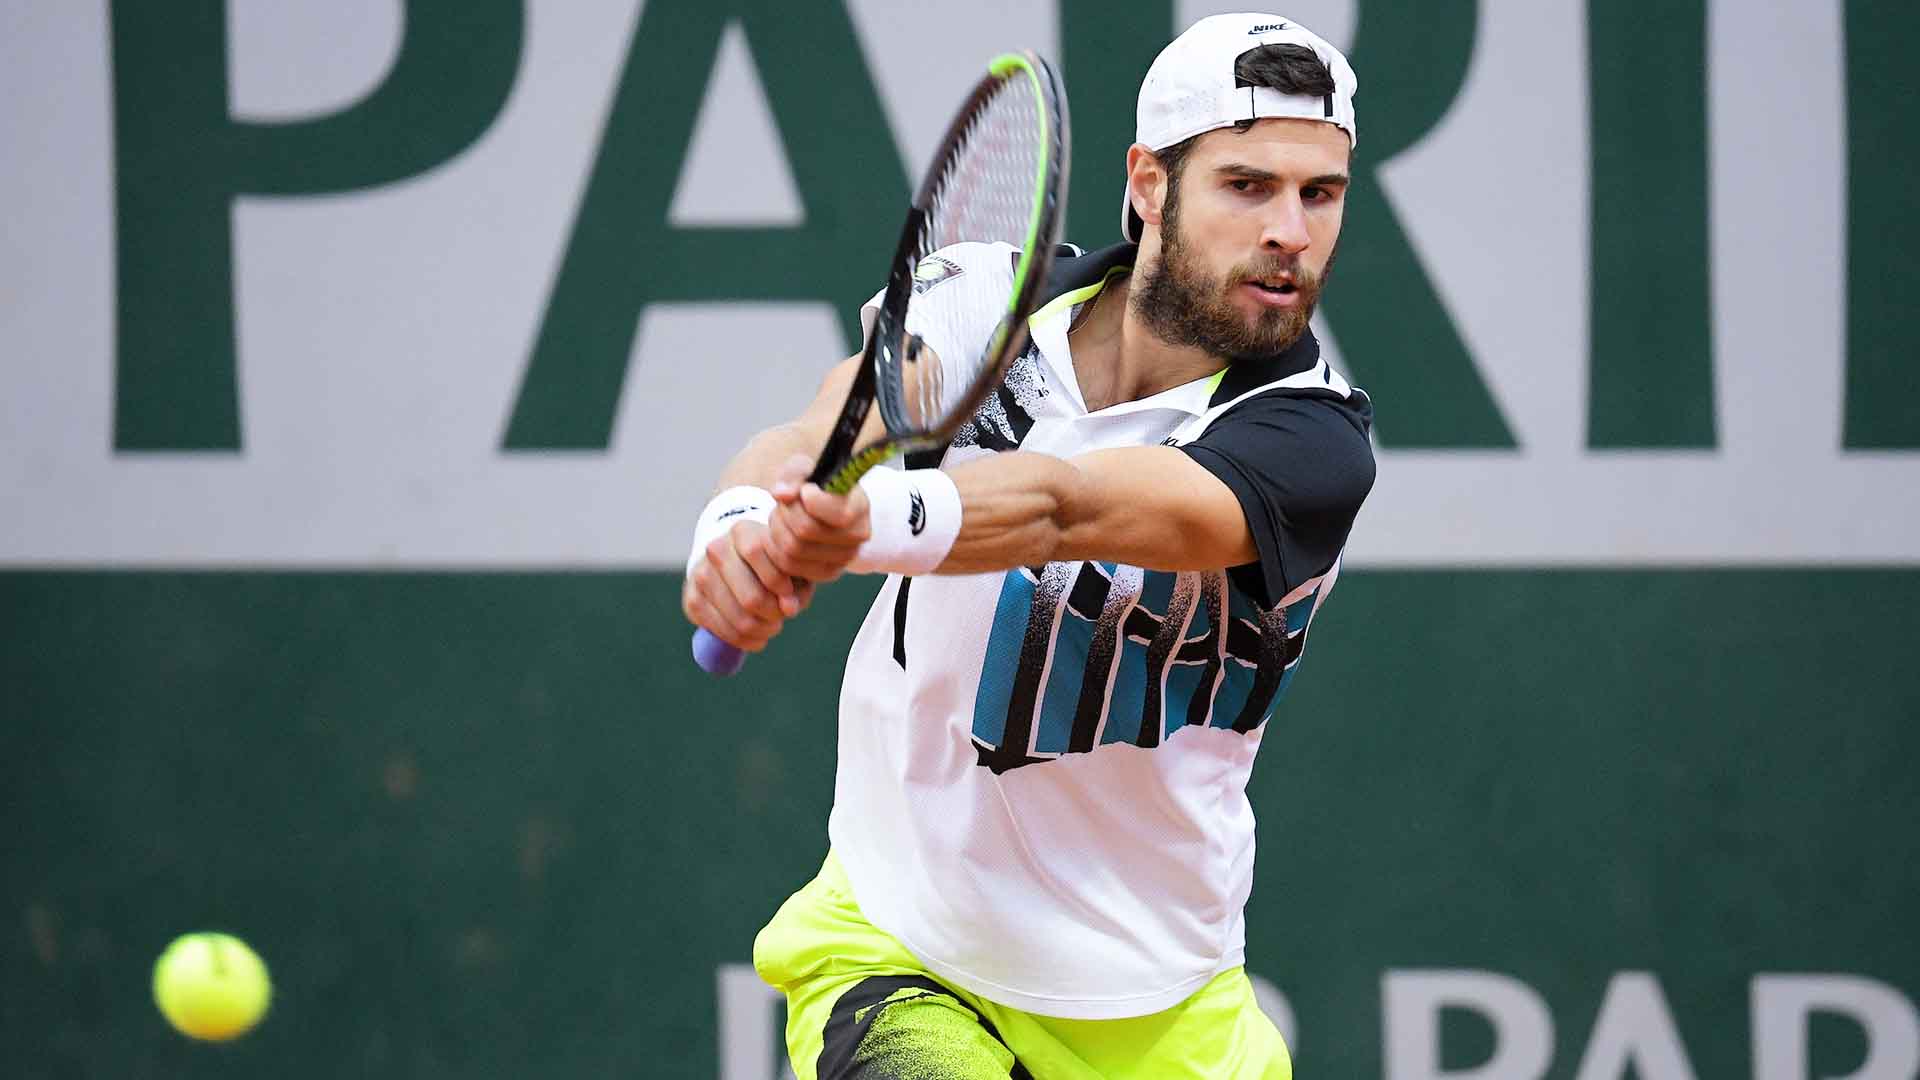 Karen Khachanov has reached the Round of 16 in each of his four visits to Roland Garros.